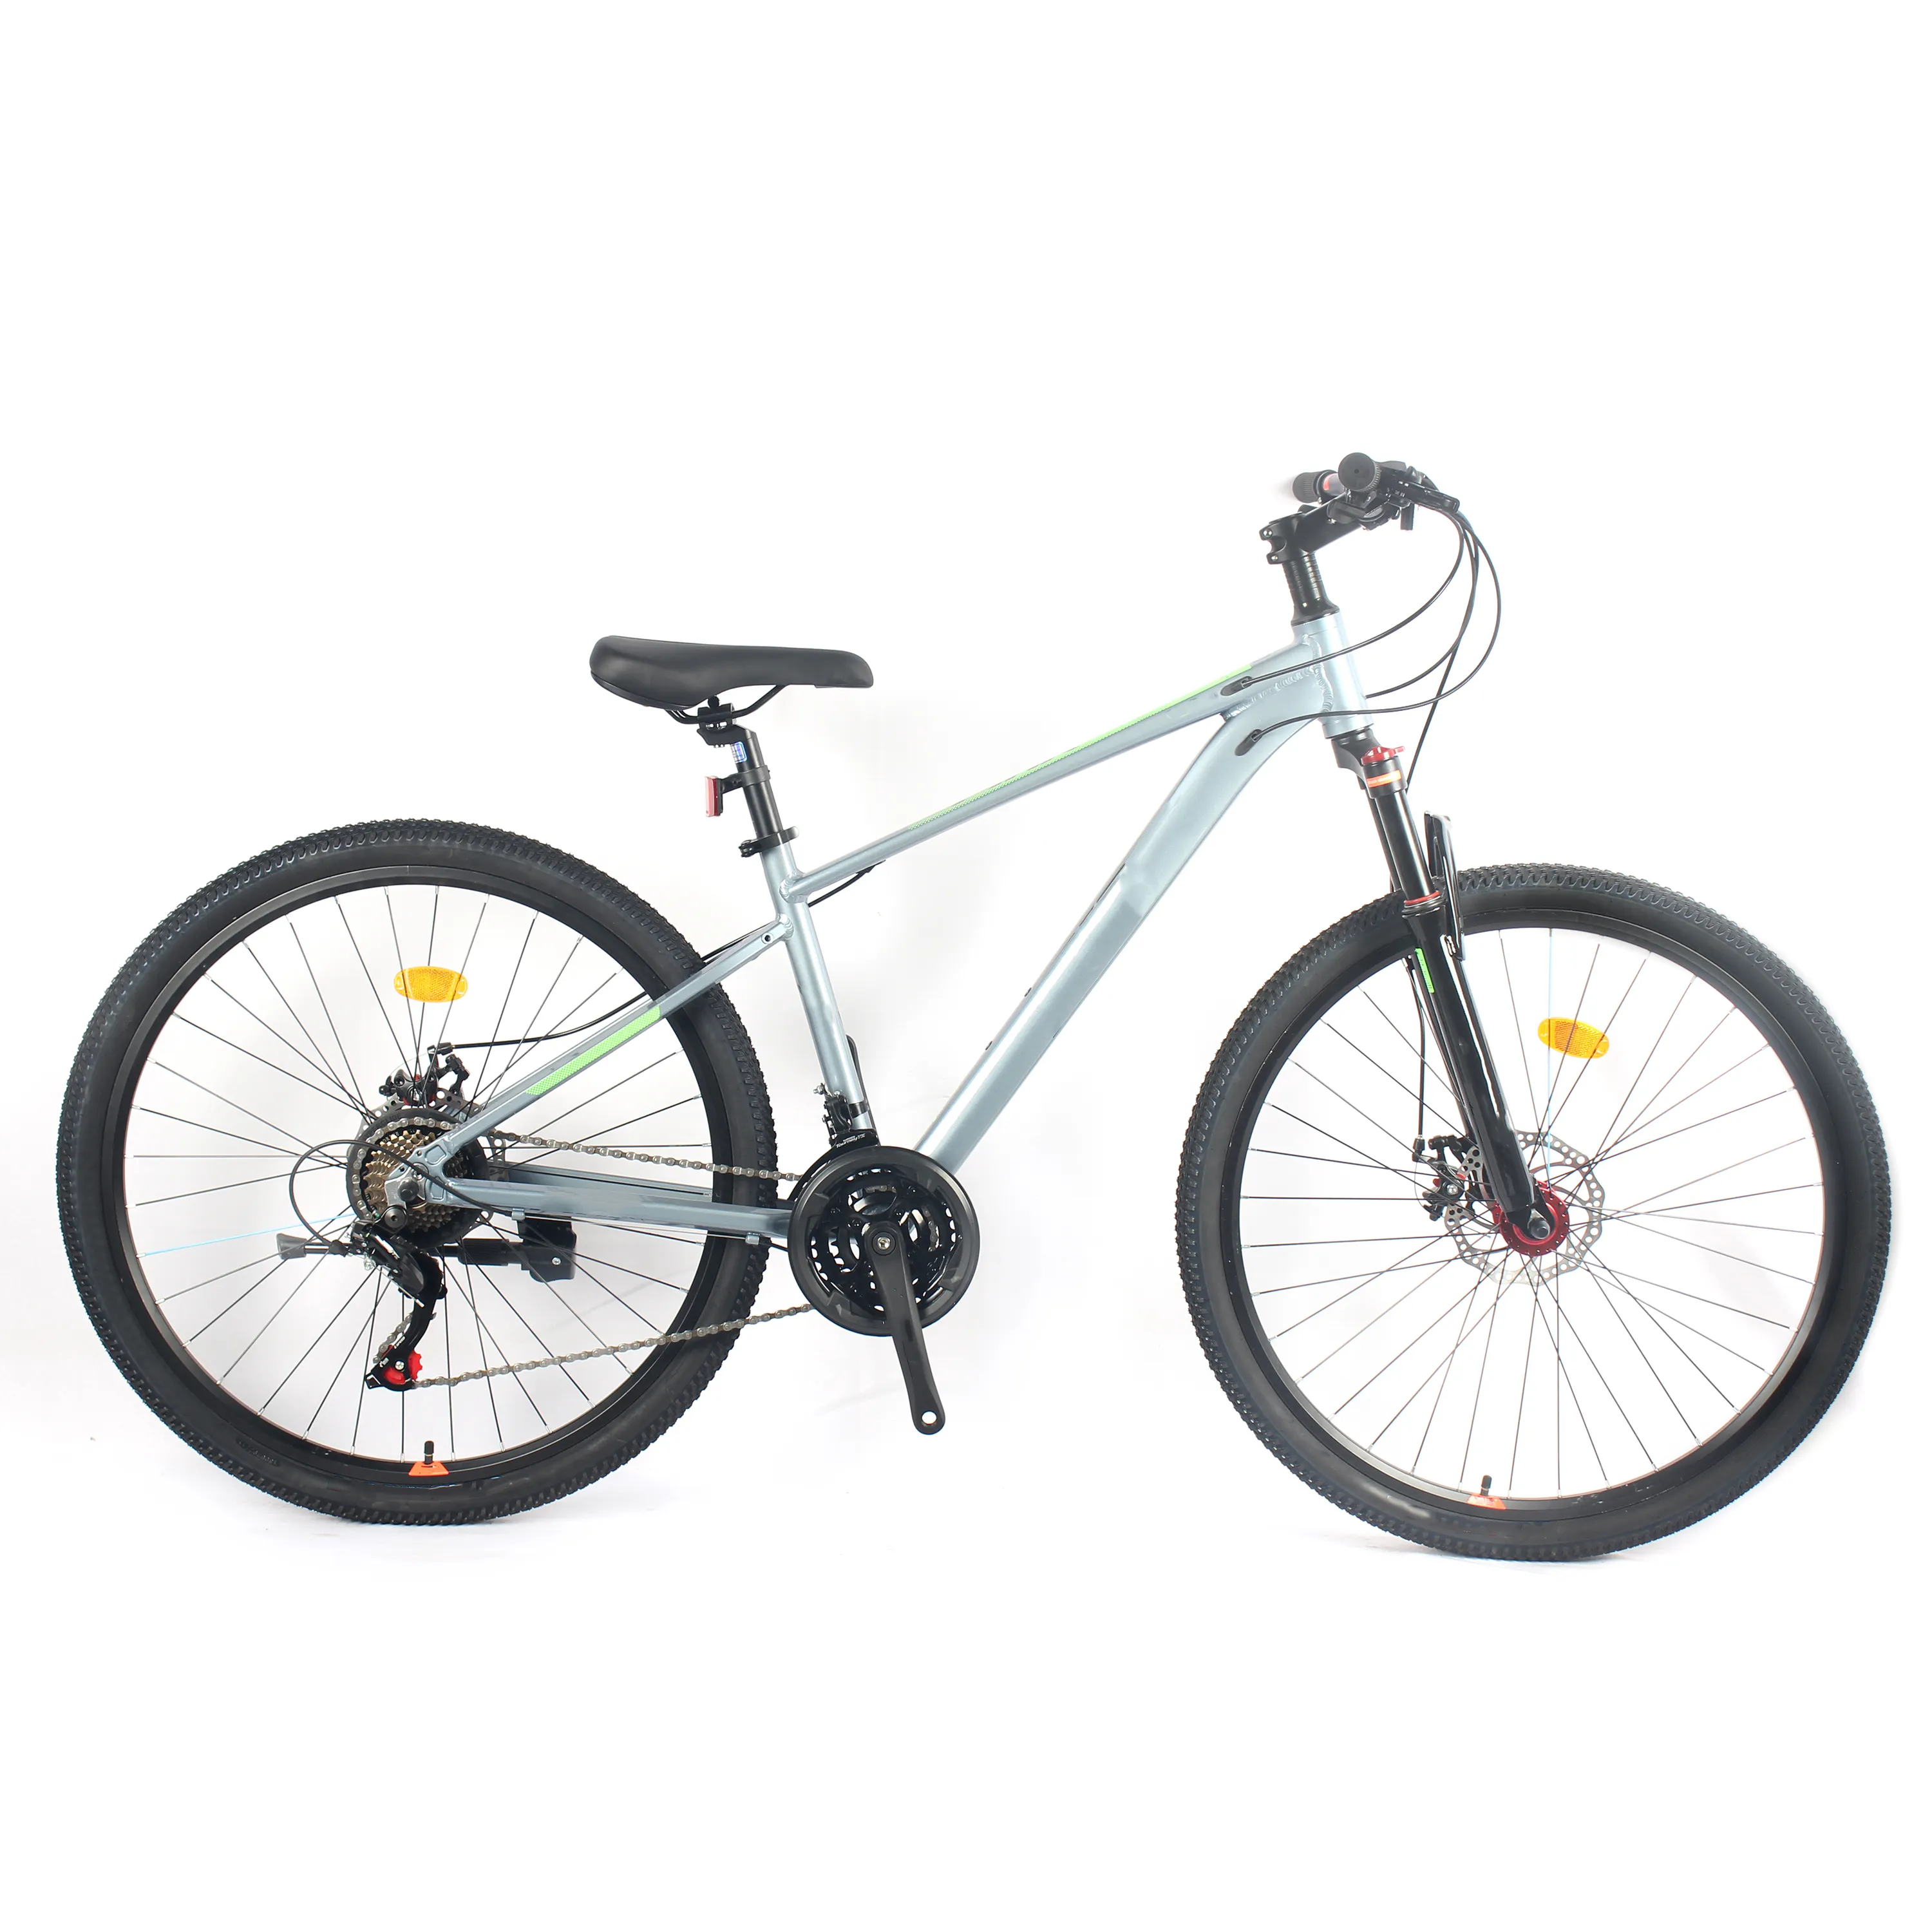 New style good quality student and adult 21 Speed mtb 24/27.5 inch mountain bike